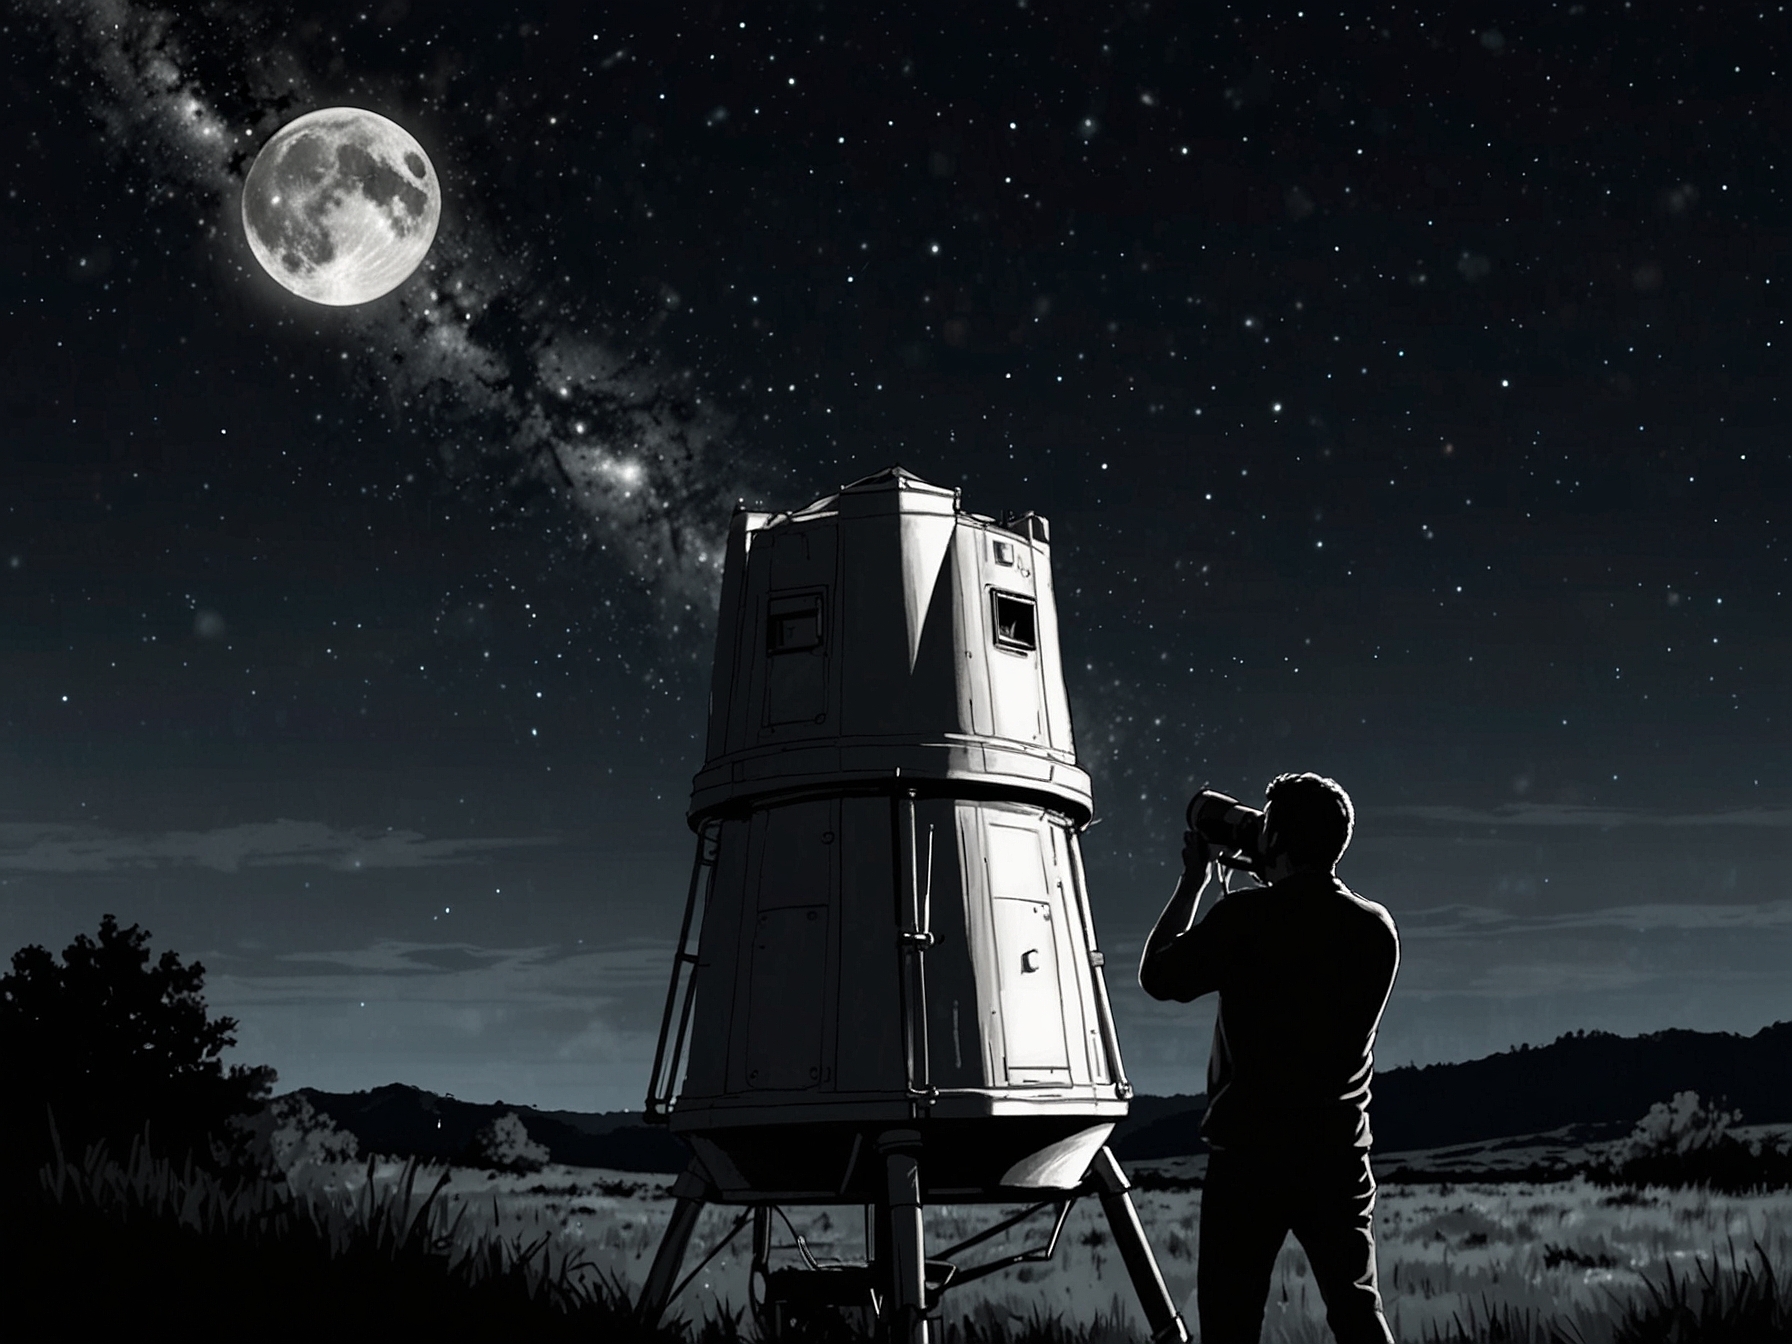 A clear night sky with an amateur astronomer using a telescope to observe the asteroid 2024 MK as it makes its close approach to Earth, providing an excellent opportunity for sky watching.